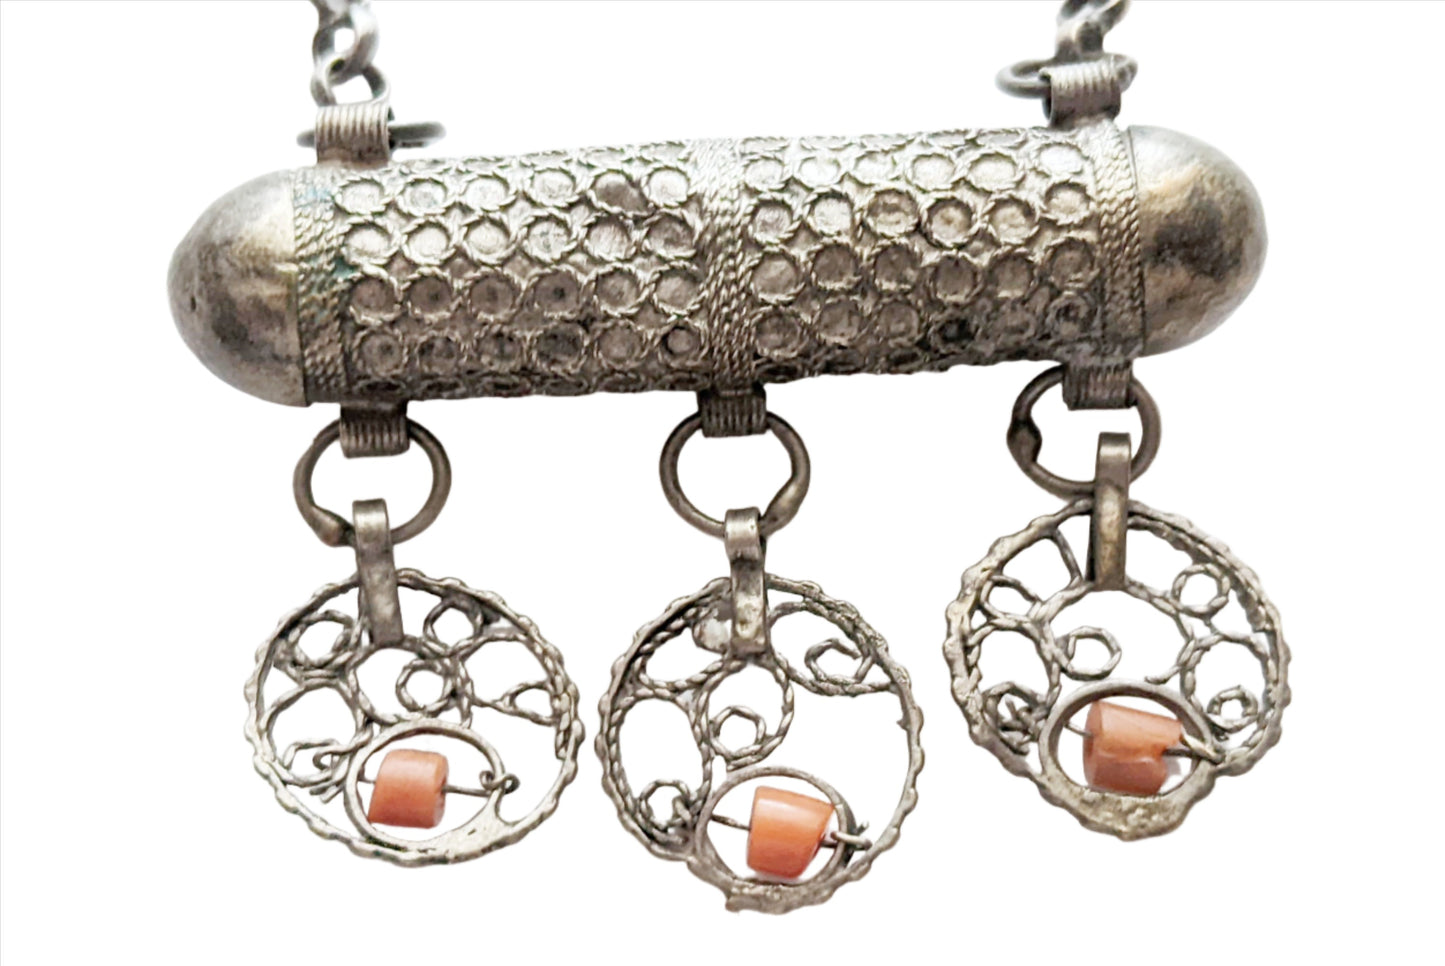 Antique Ottoman Silver and Coral Amulet Necklace